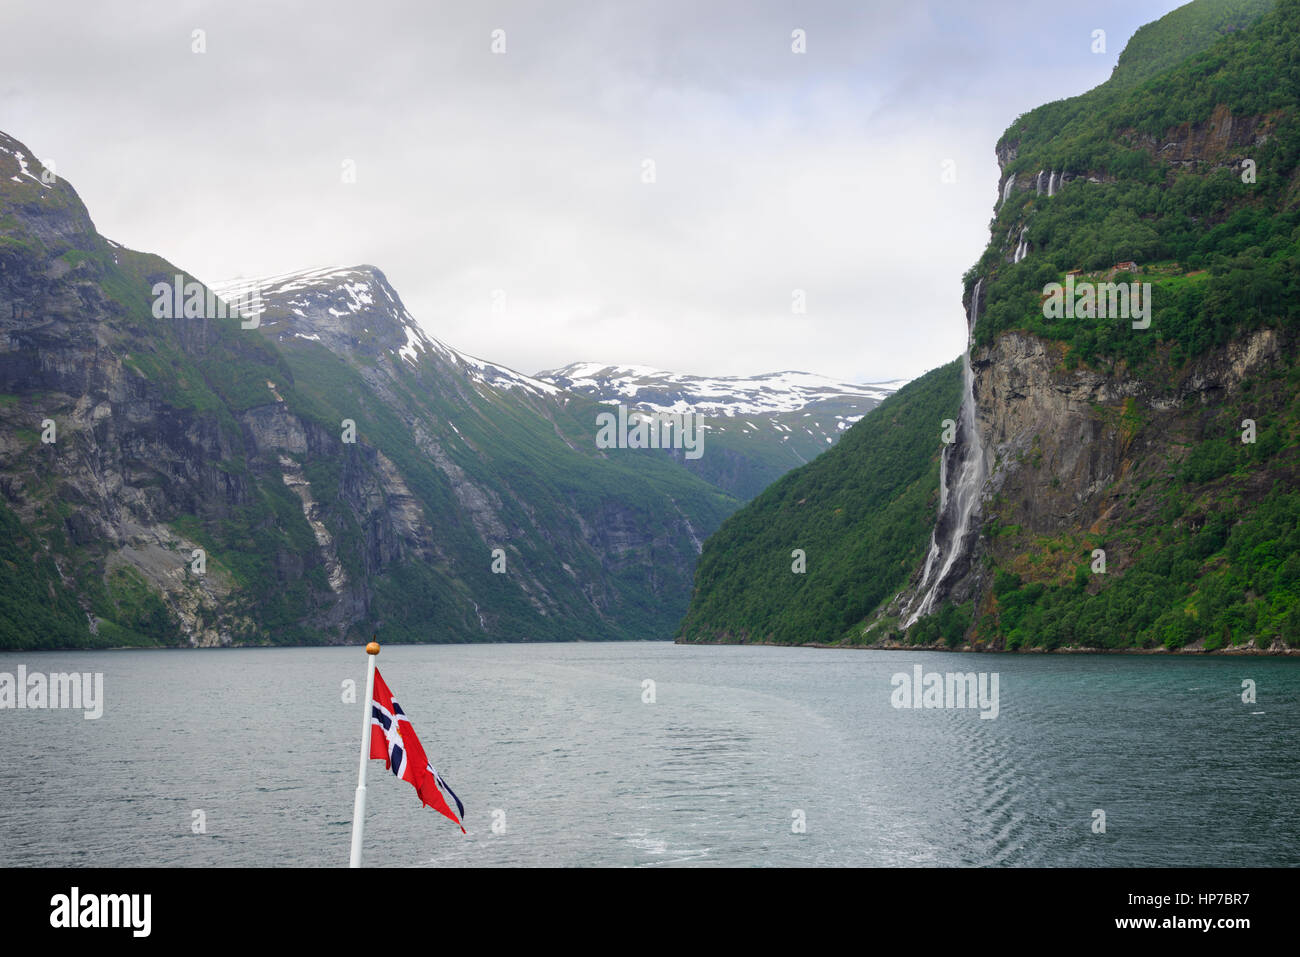 Seven Sisters waterfall falling of the mountain seen from a car ferry ship with a Norwegian flag on the Geirangerfjord to Geiranger, Norway. Stock Photo